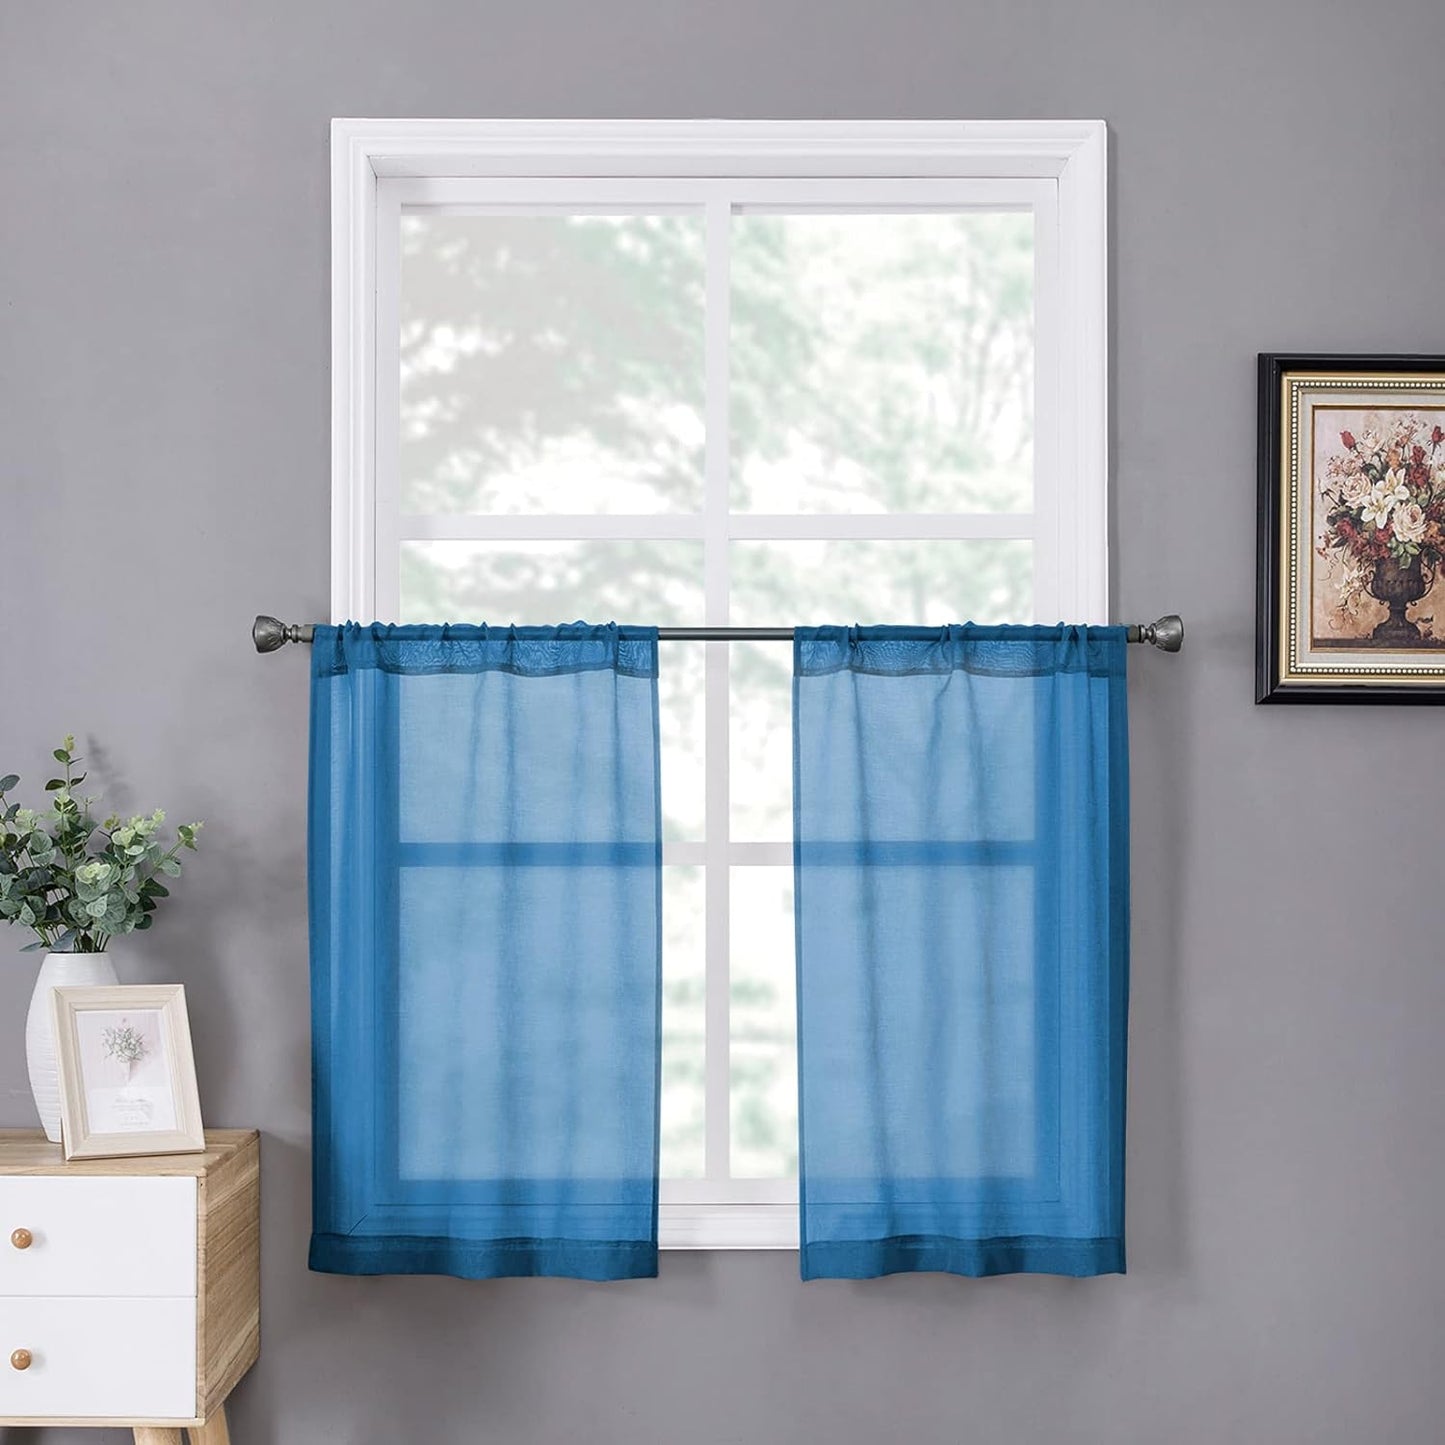 Tollpiz Short Sheer Curtains Linen Textured Bedroom Curtain Sheers Light Filtering Rod Pocket Voile Curtains for Living Room, 54 X 45 Inches Long, White, Set of 2 Panels  Tollpiz Tex Classic Blue 25"W X 24"L 